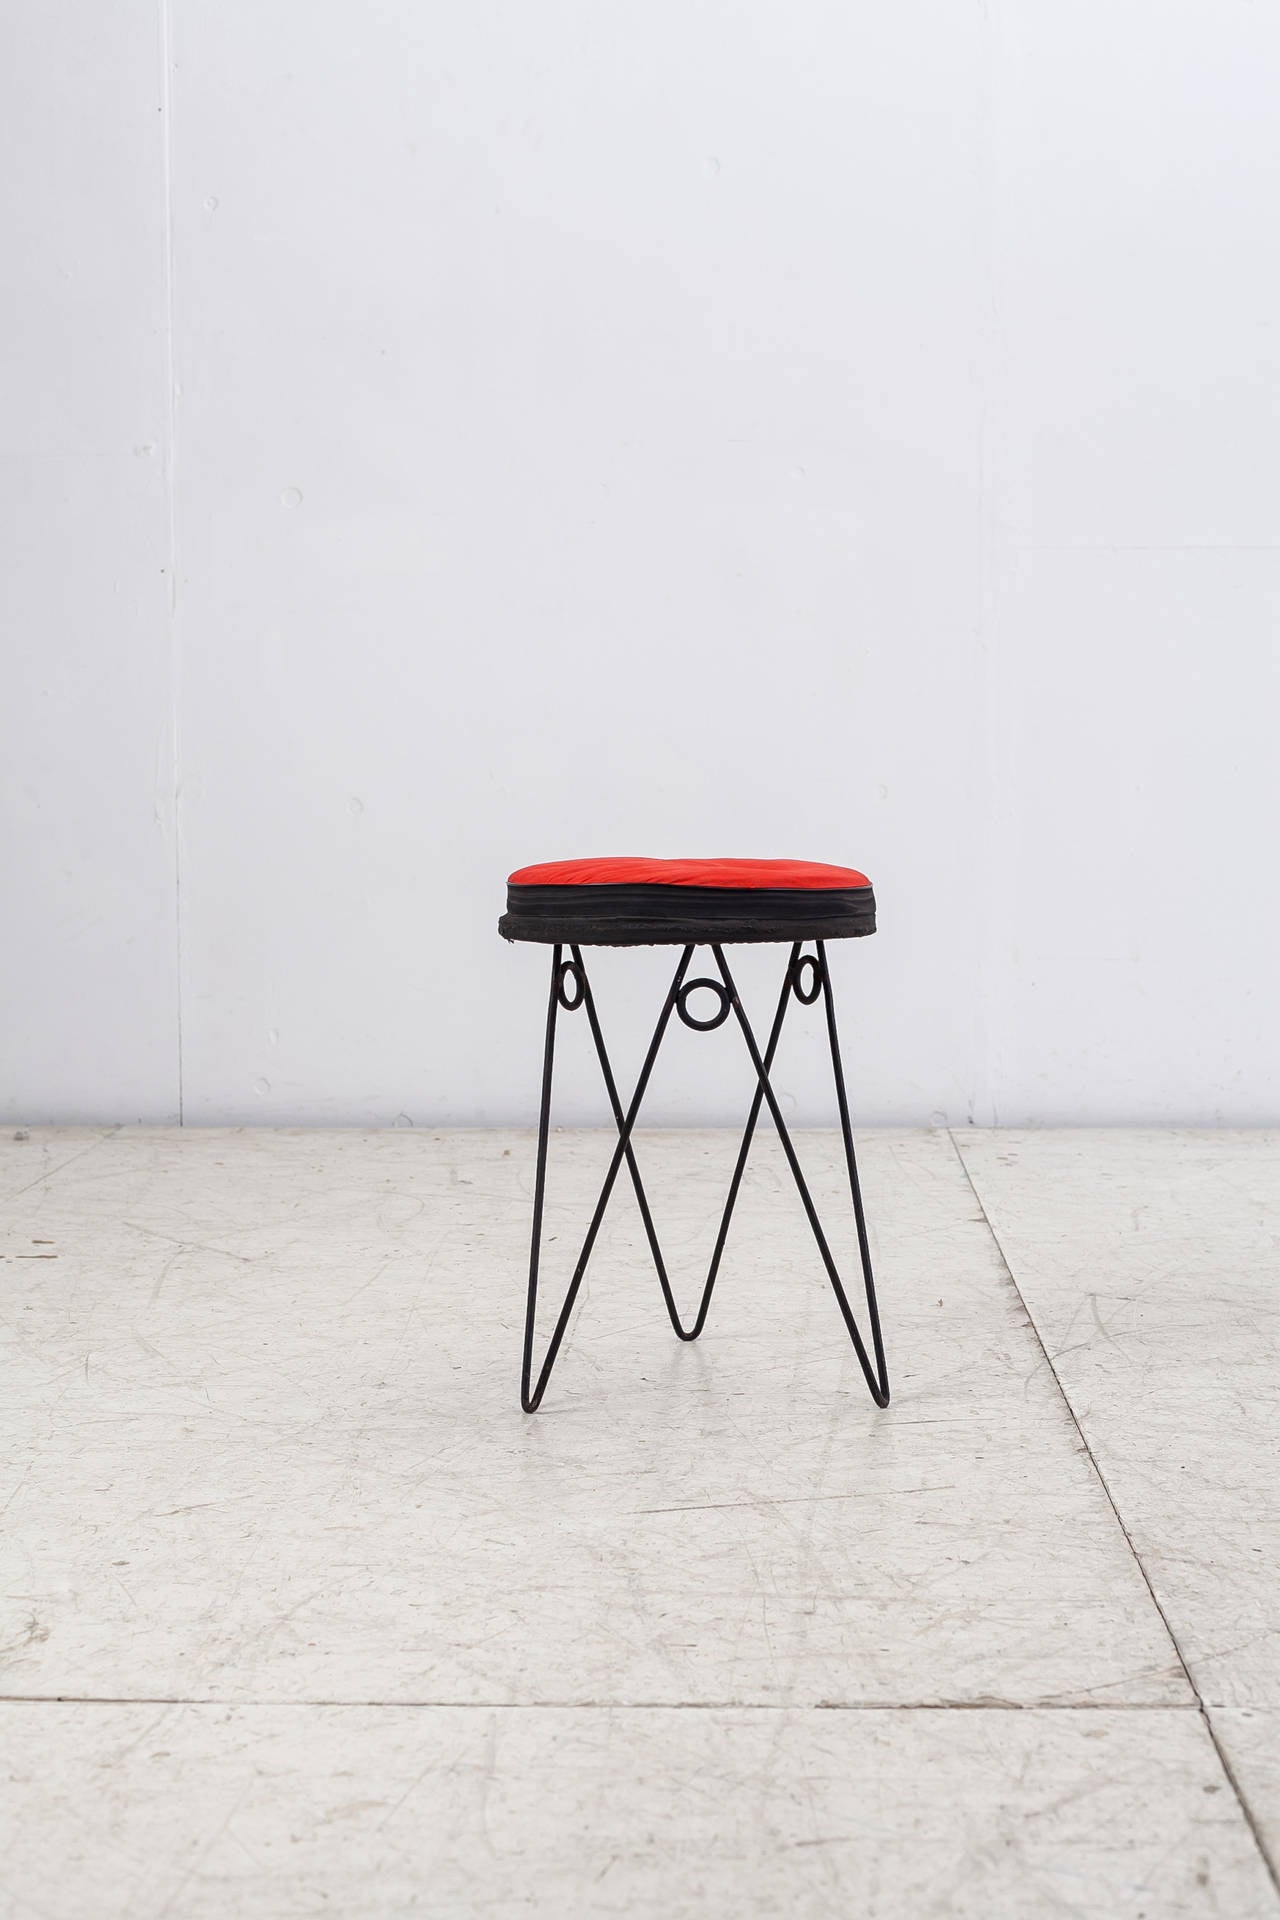 A 1950s French stool by Jean Royère or in the manner of. The stool is made of a playful iron hairpin frame with a black and red fabric seat pad. The frame is strongly reminiscent of Royère's 'Yo-Yo' series.

The seat pad has been professionally